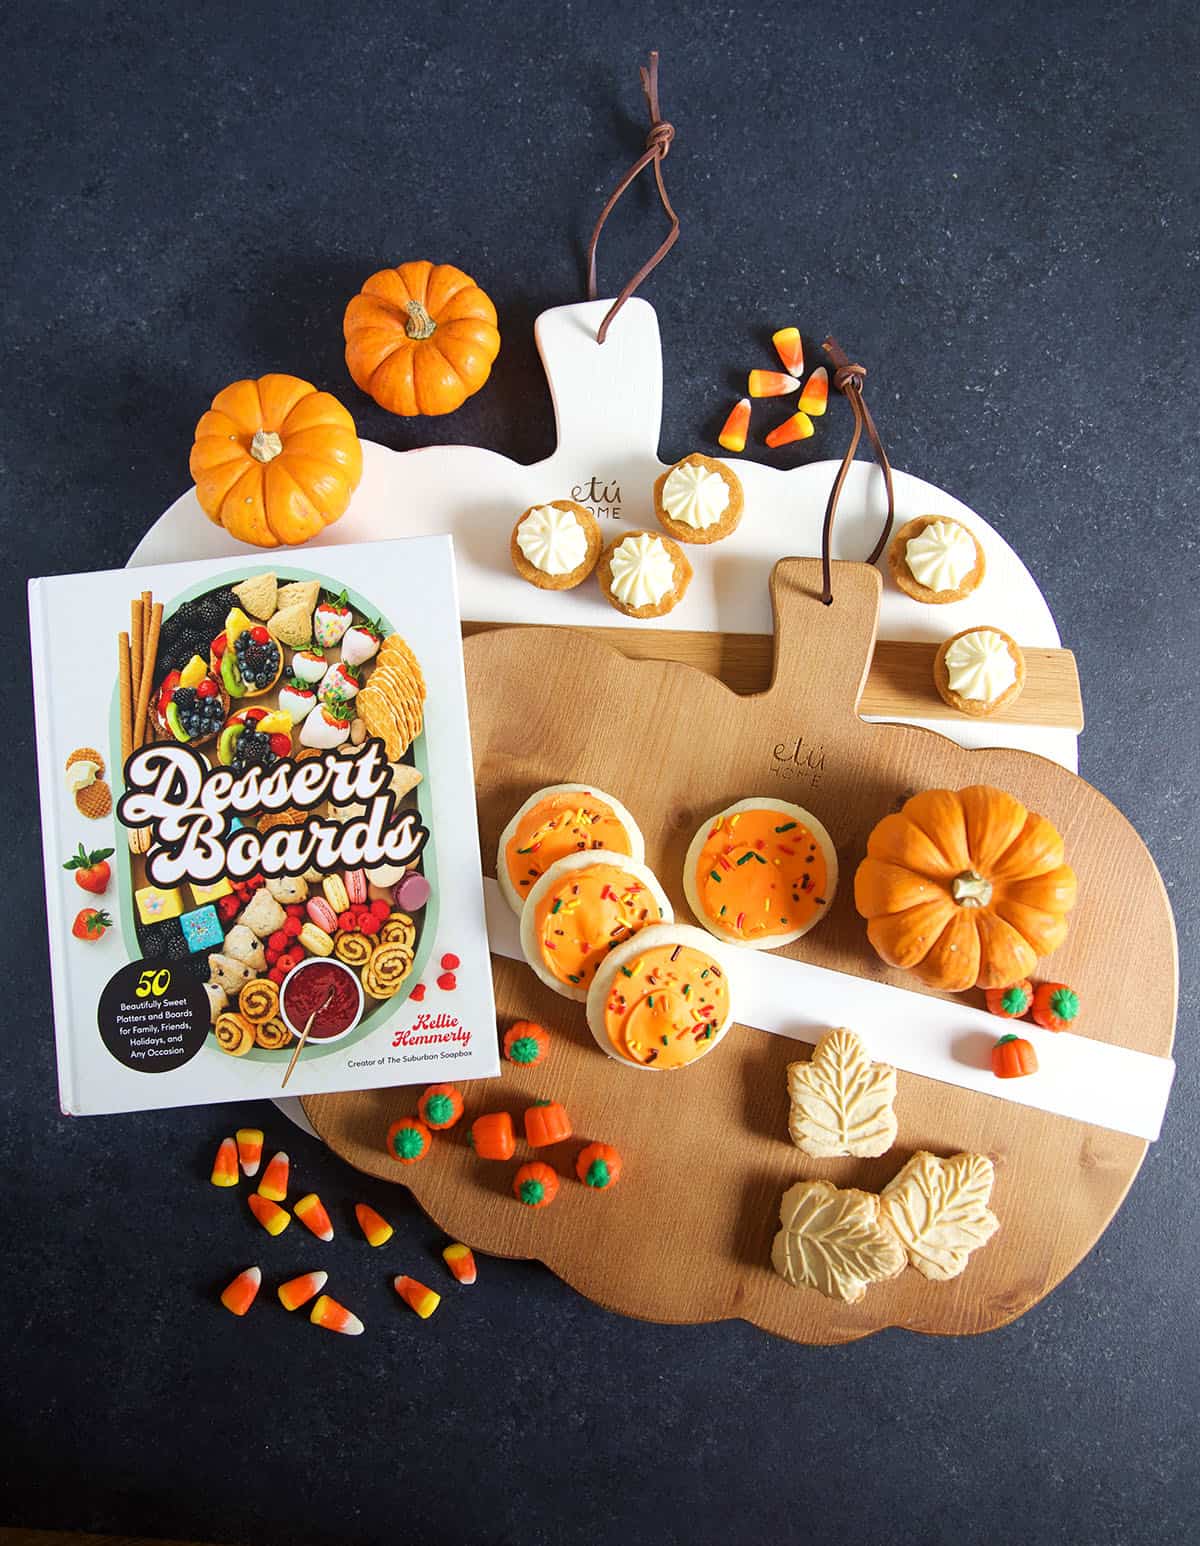 A dessert board cook book is positioned on pumpkin serving platters next to mini pumpkins and cookies.